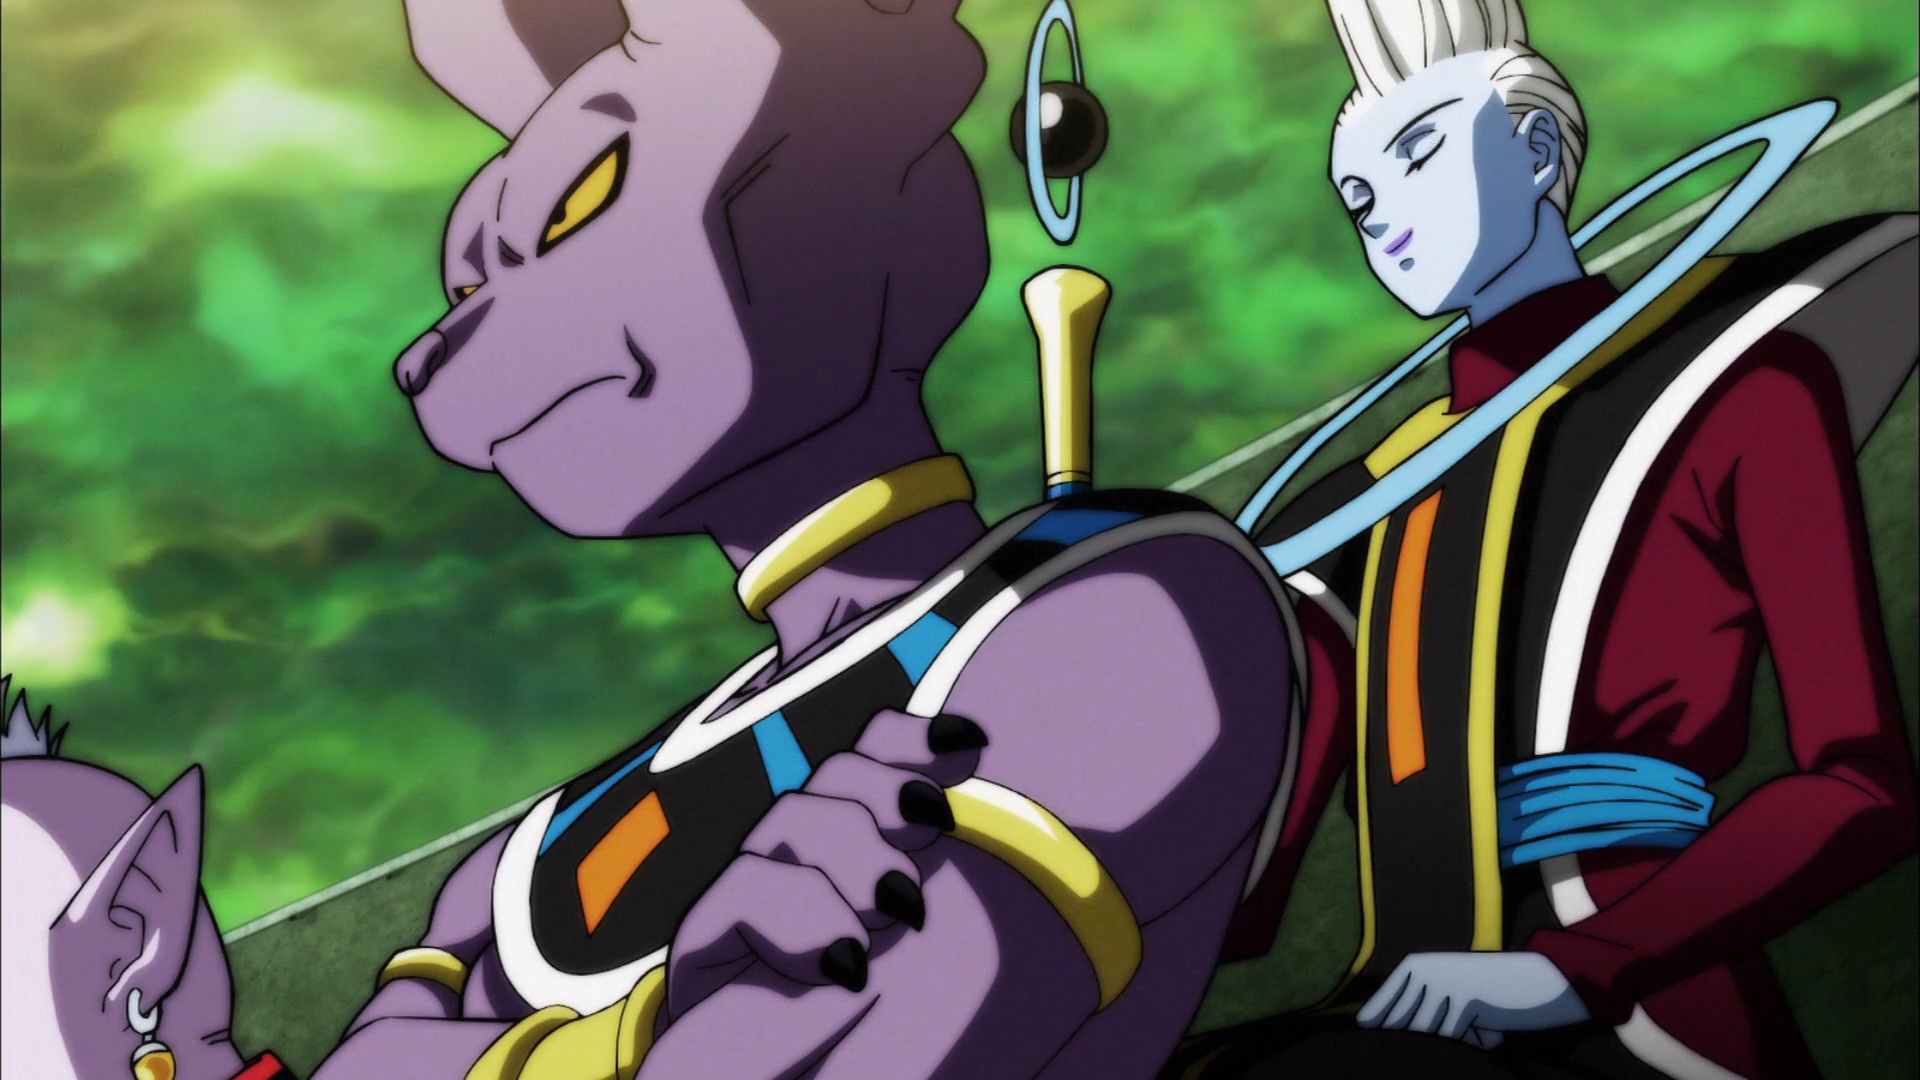 Beerus and Whis.